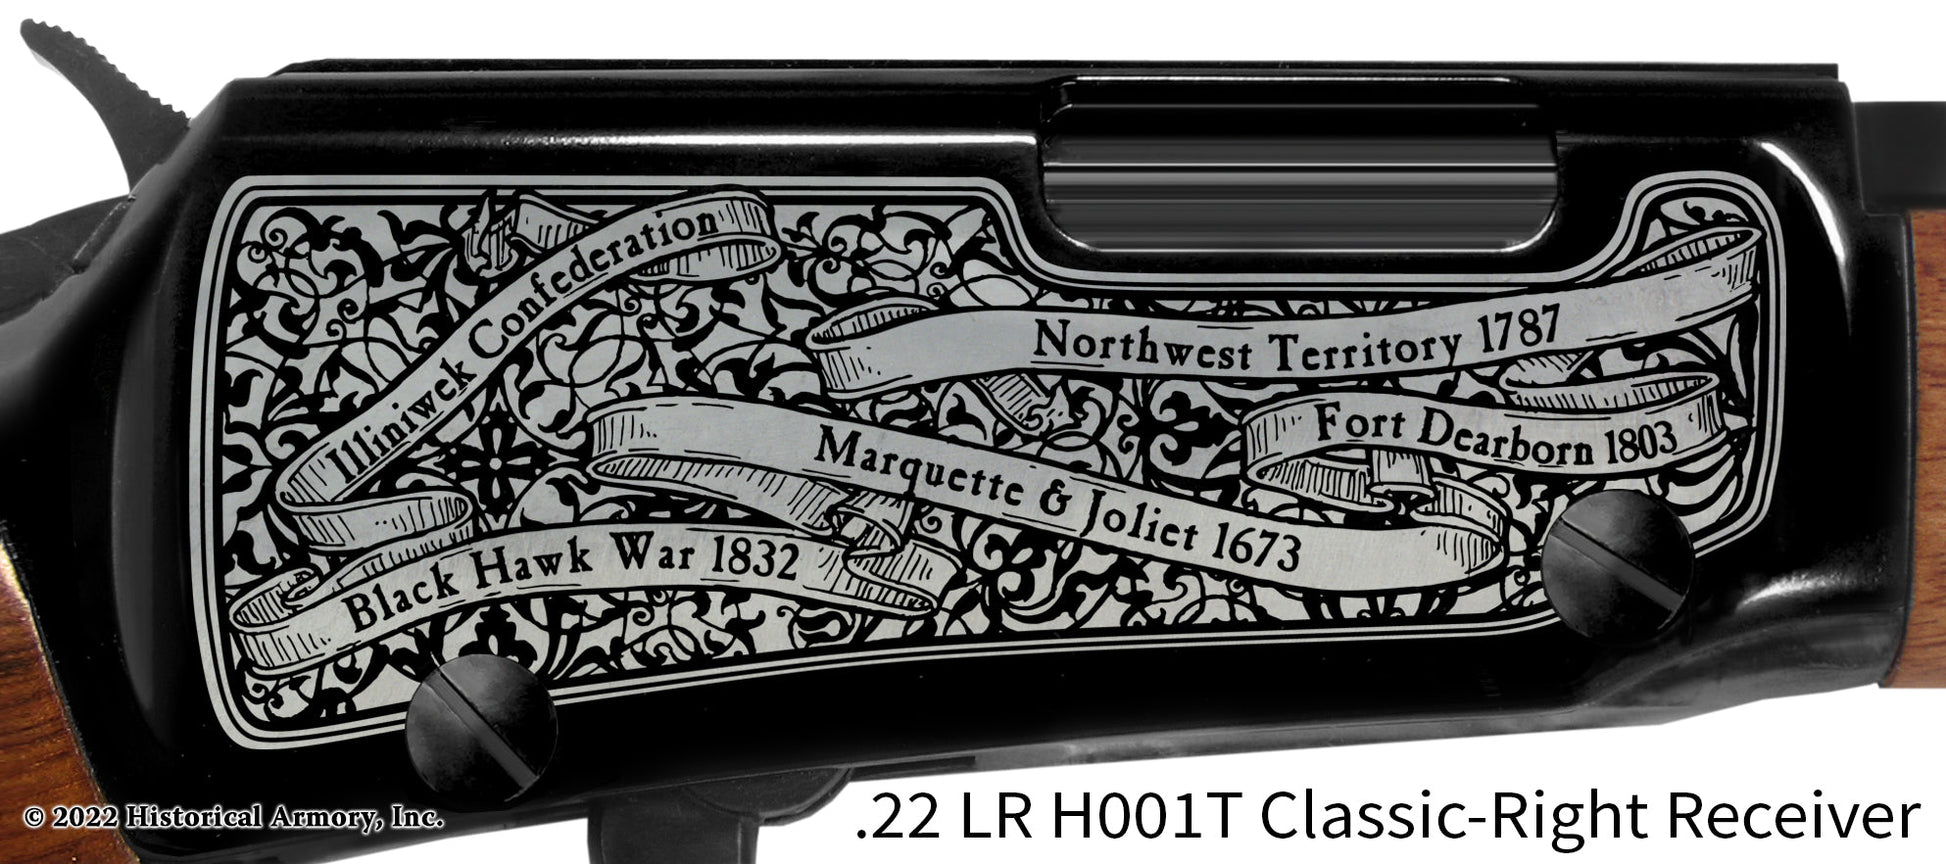 Illinois State Pride Engraved H00T Receiver detail Henry Rifle